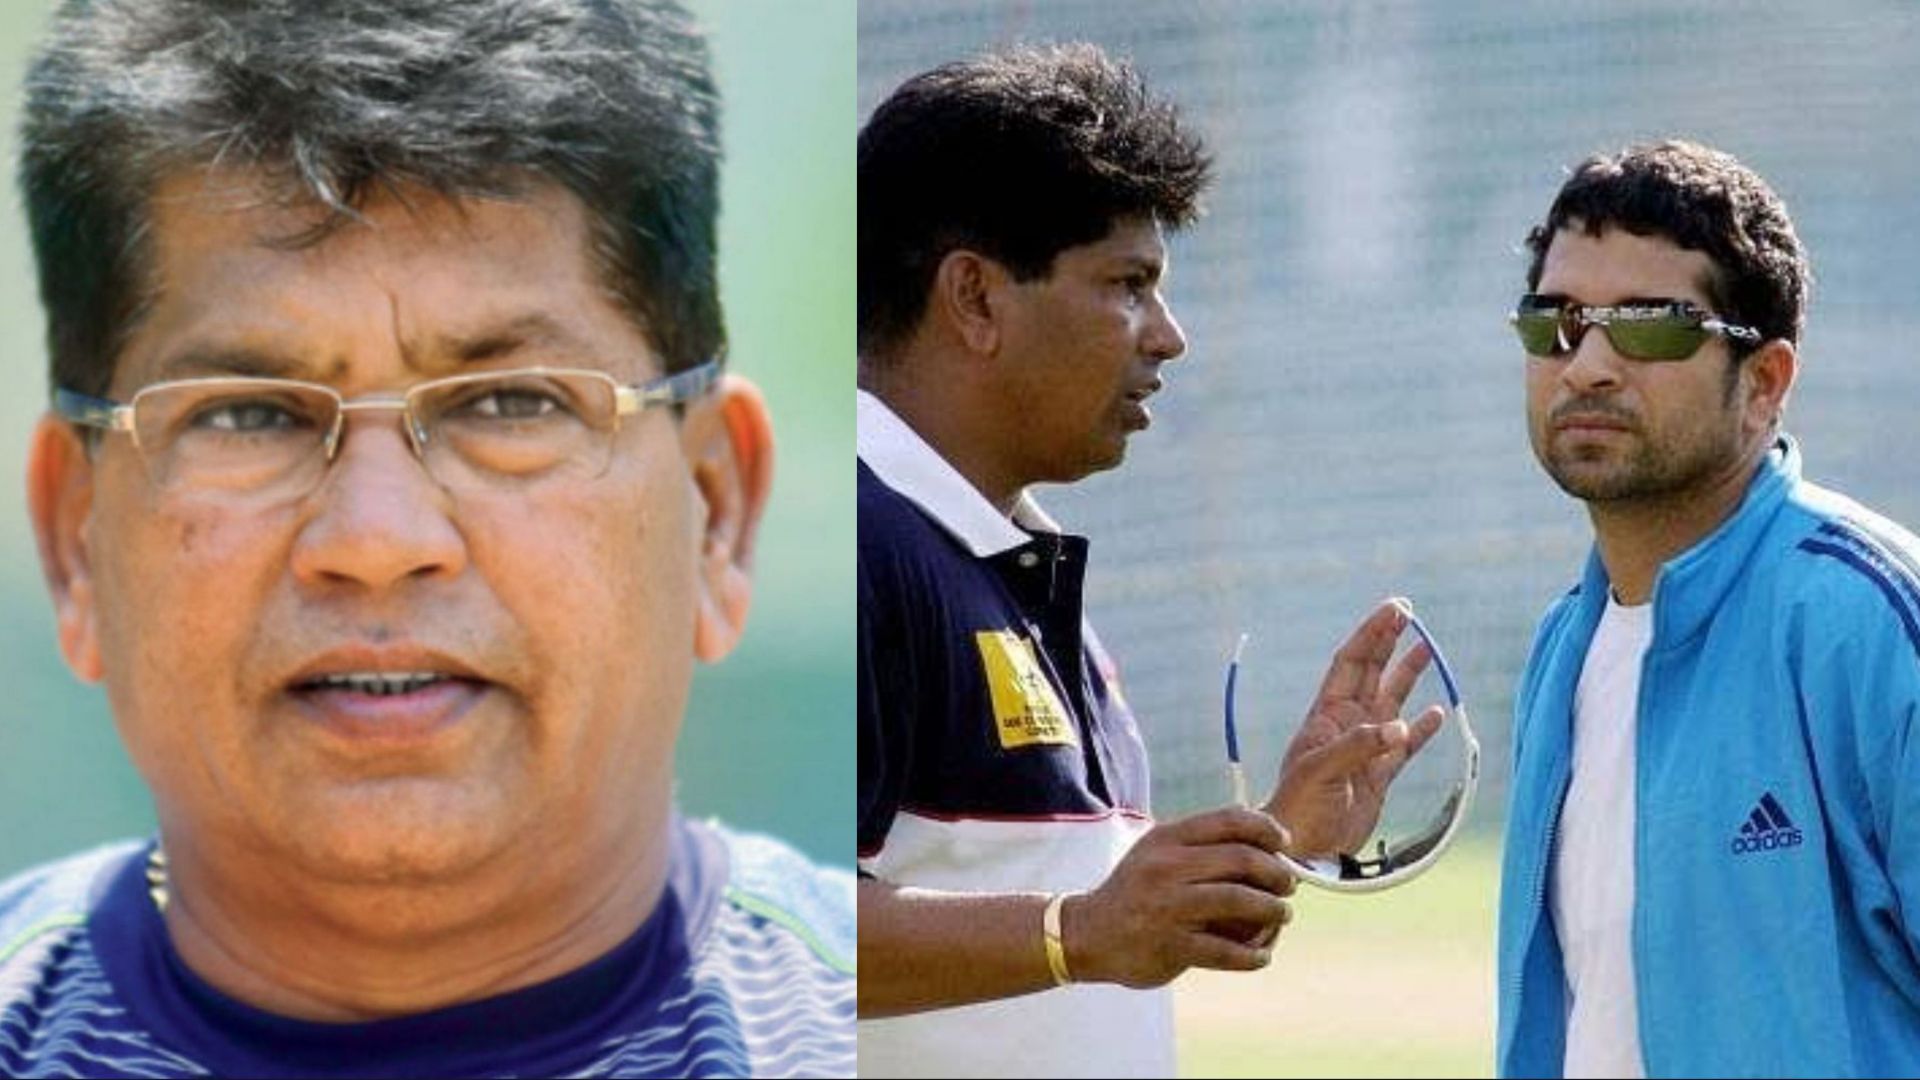 Chandrakant Pandit has been labeled as one of the best coaches in Indian domestic cricket